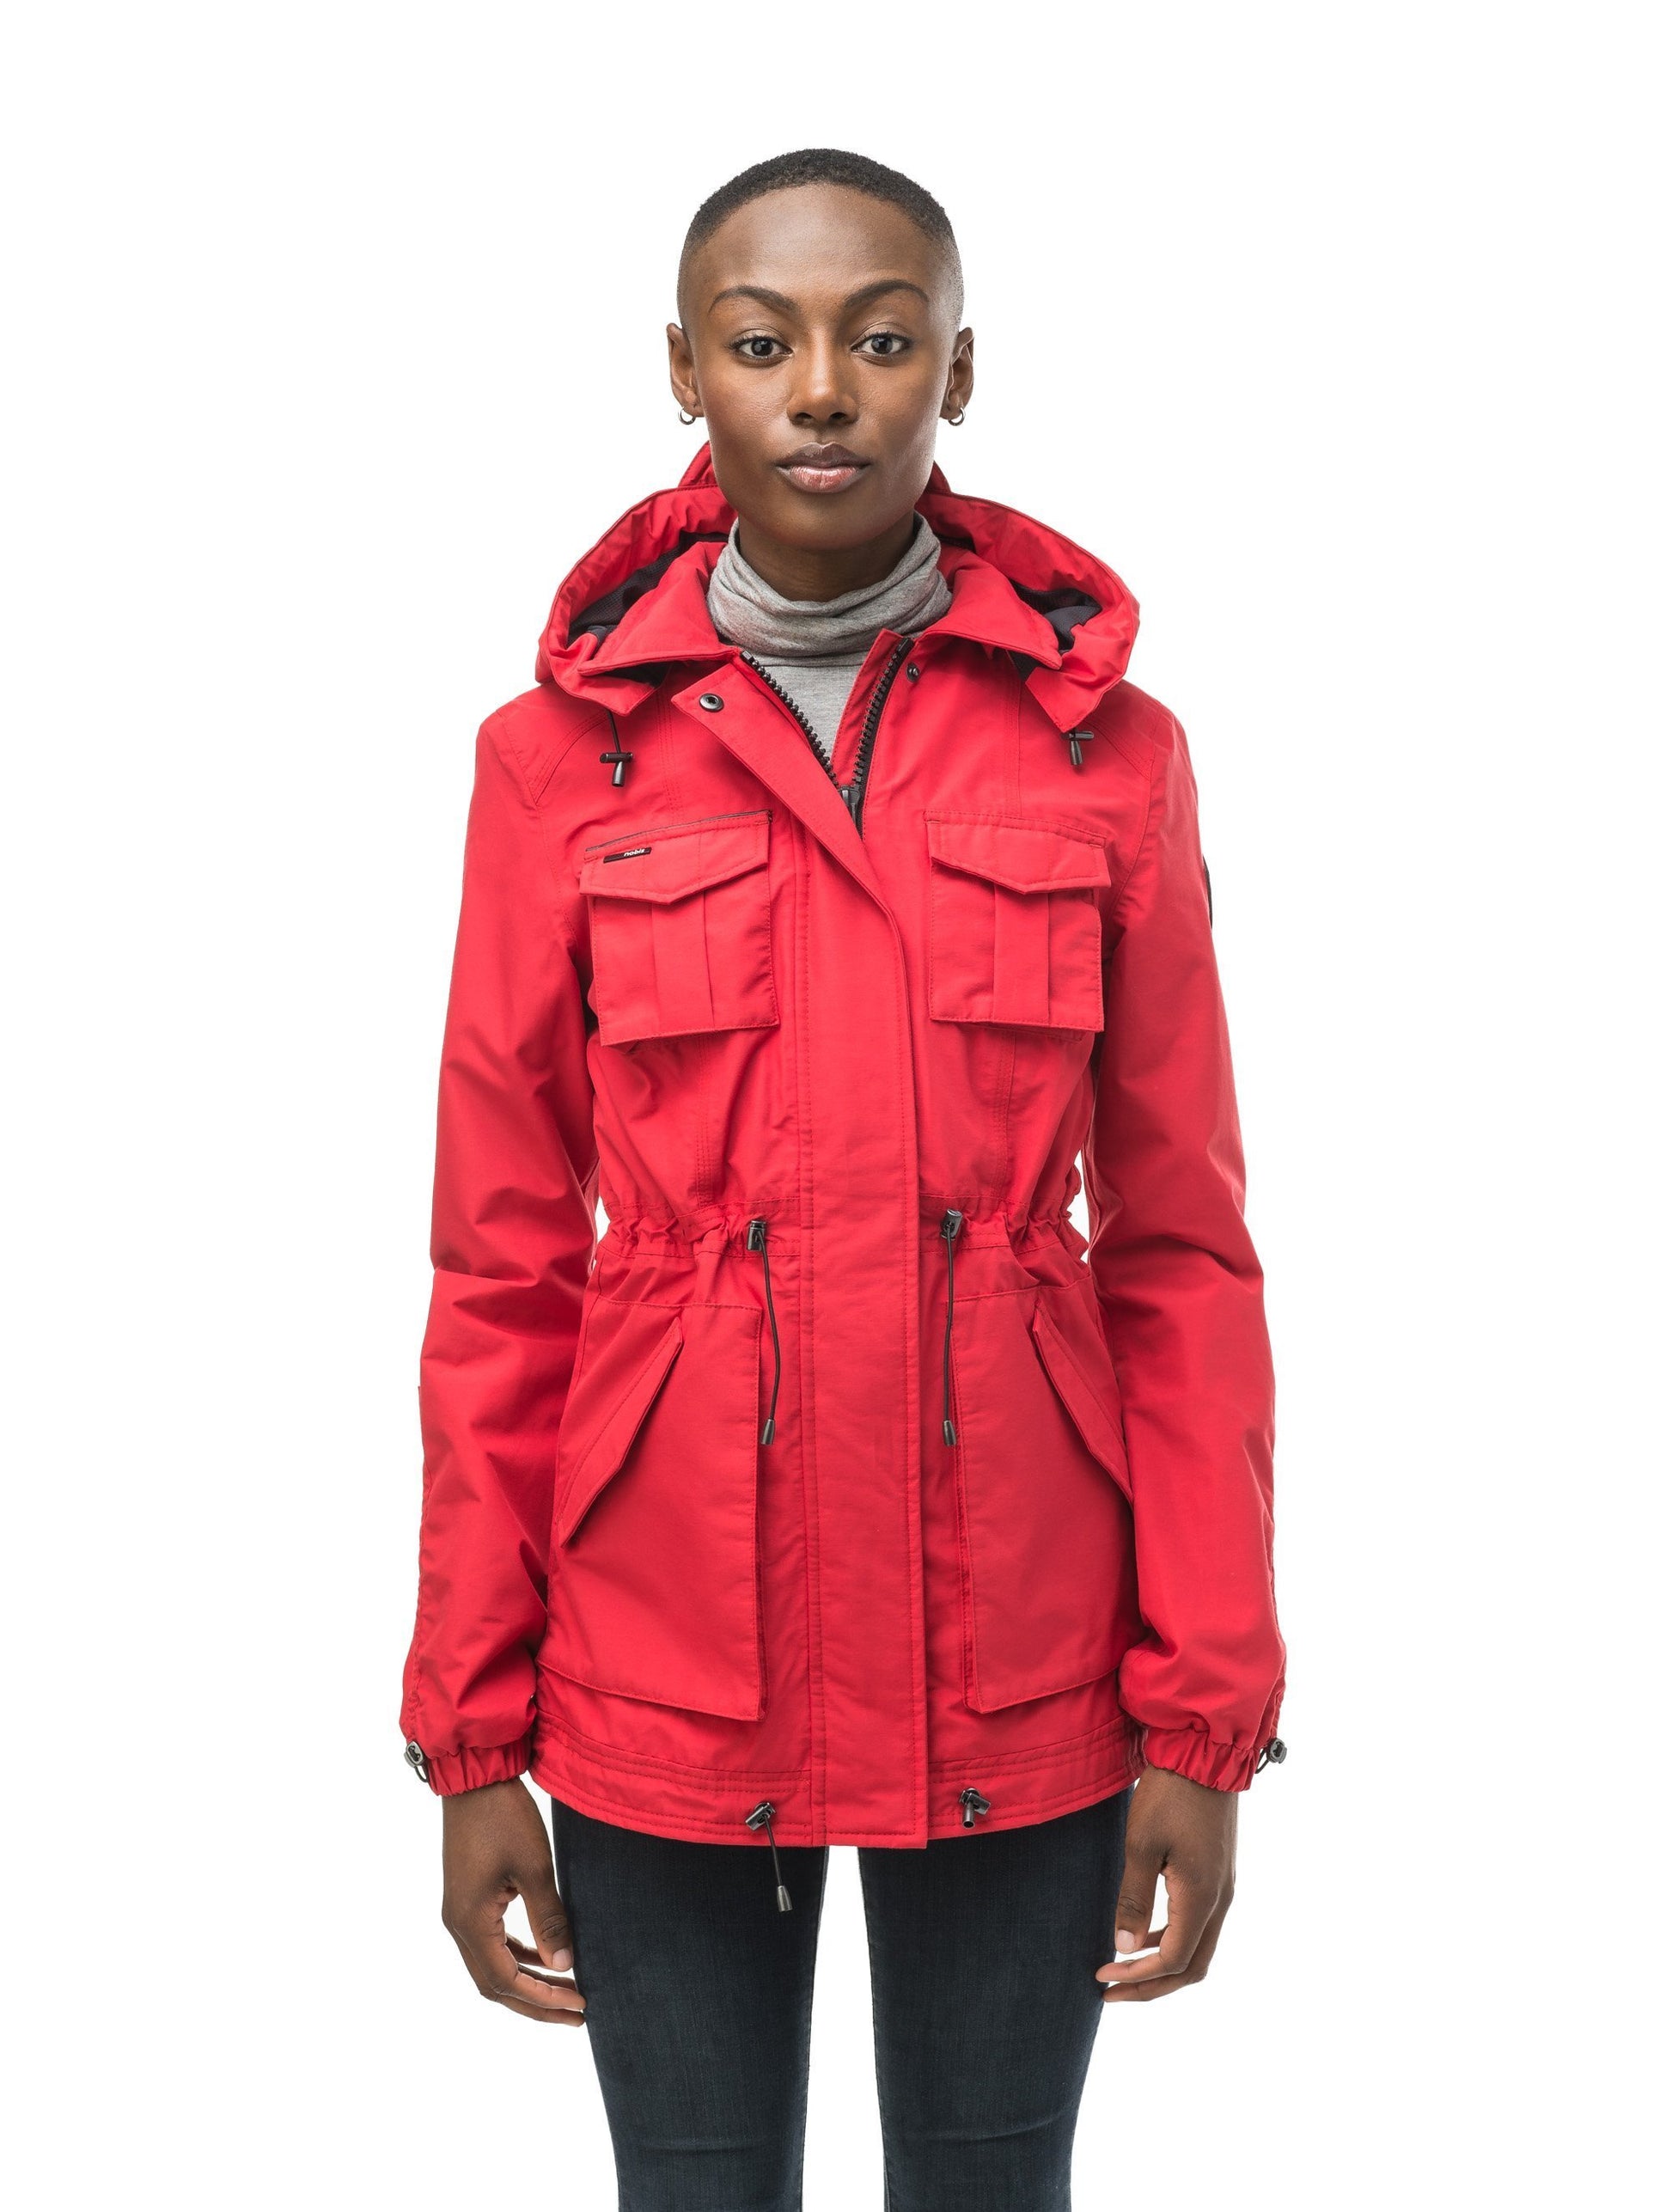 Women's hooded shirt jacket with four front pockets and adjustable waist in Red